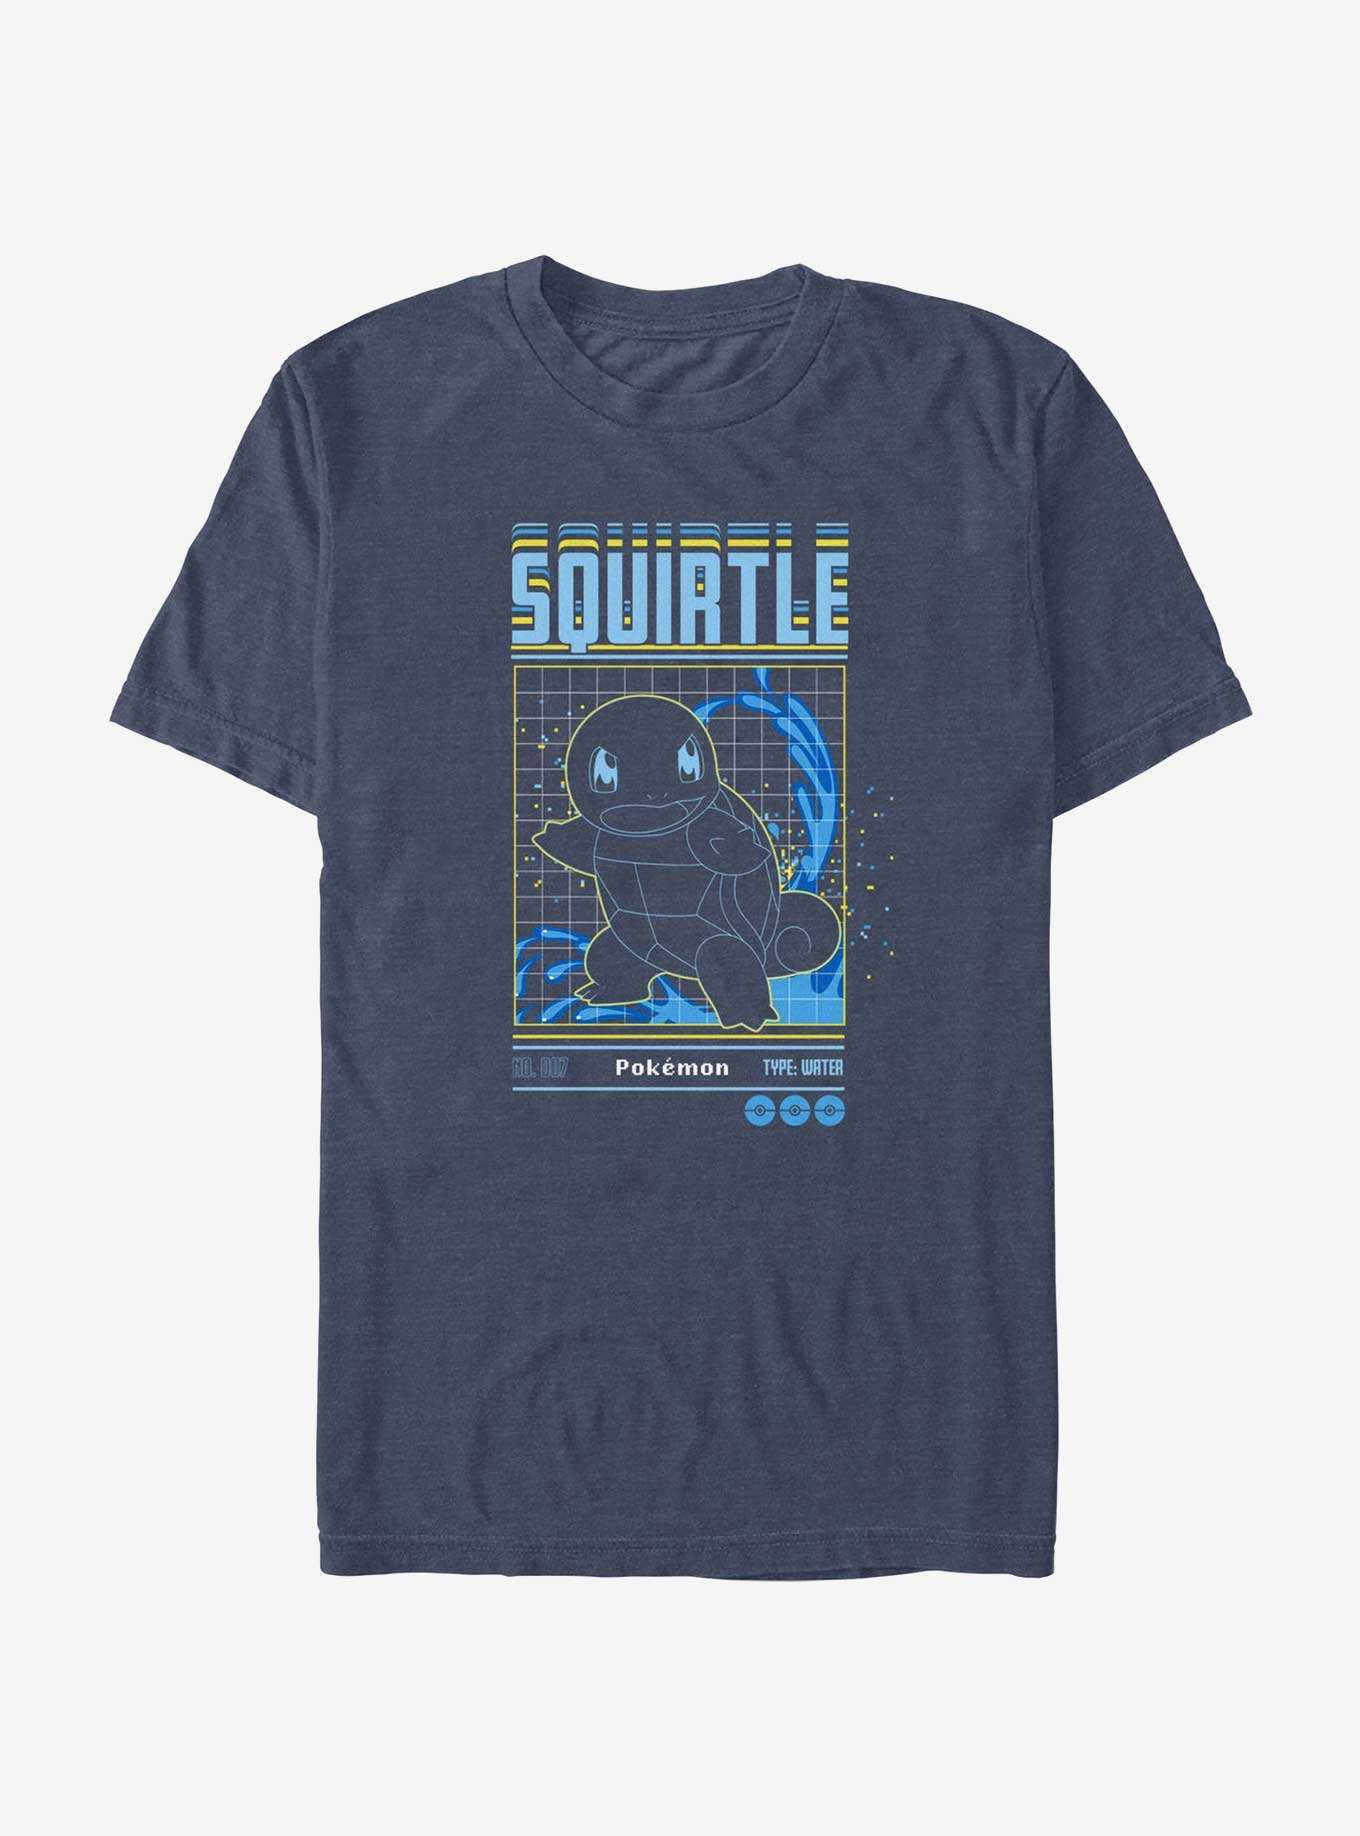 Pokemon Squirtle Grid T-Shirt, , hi-res